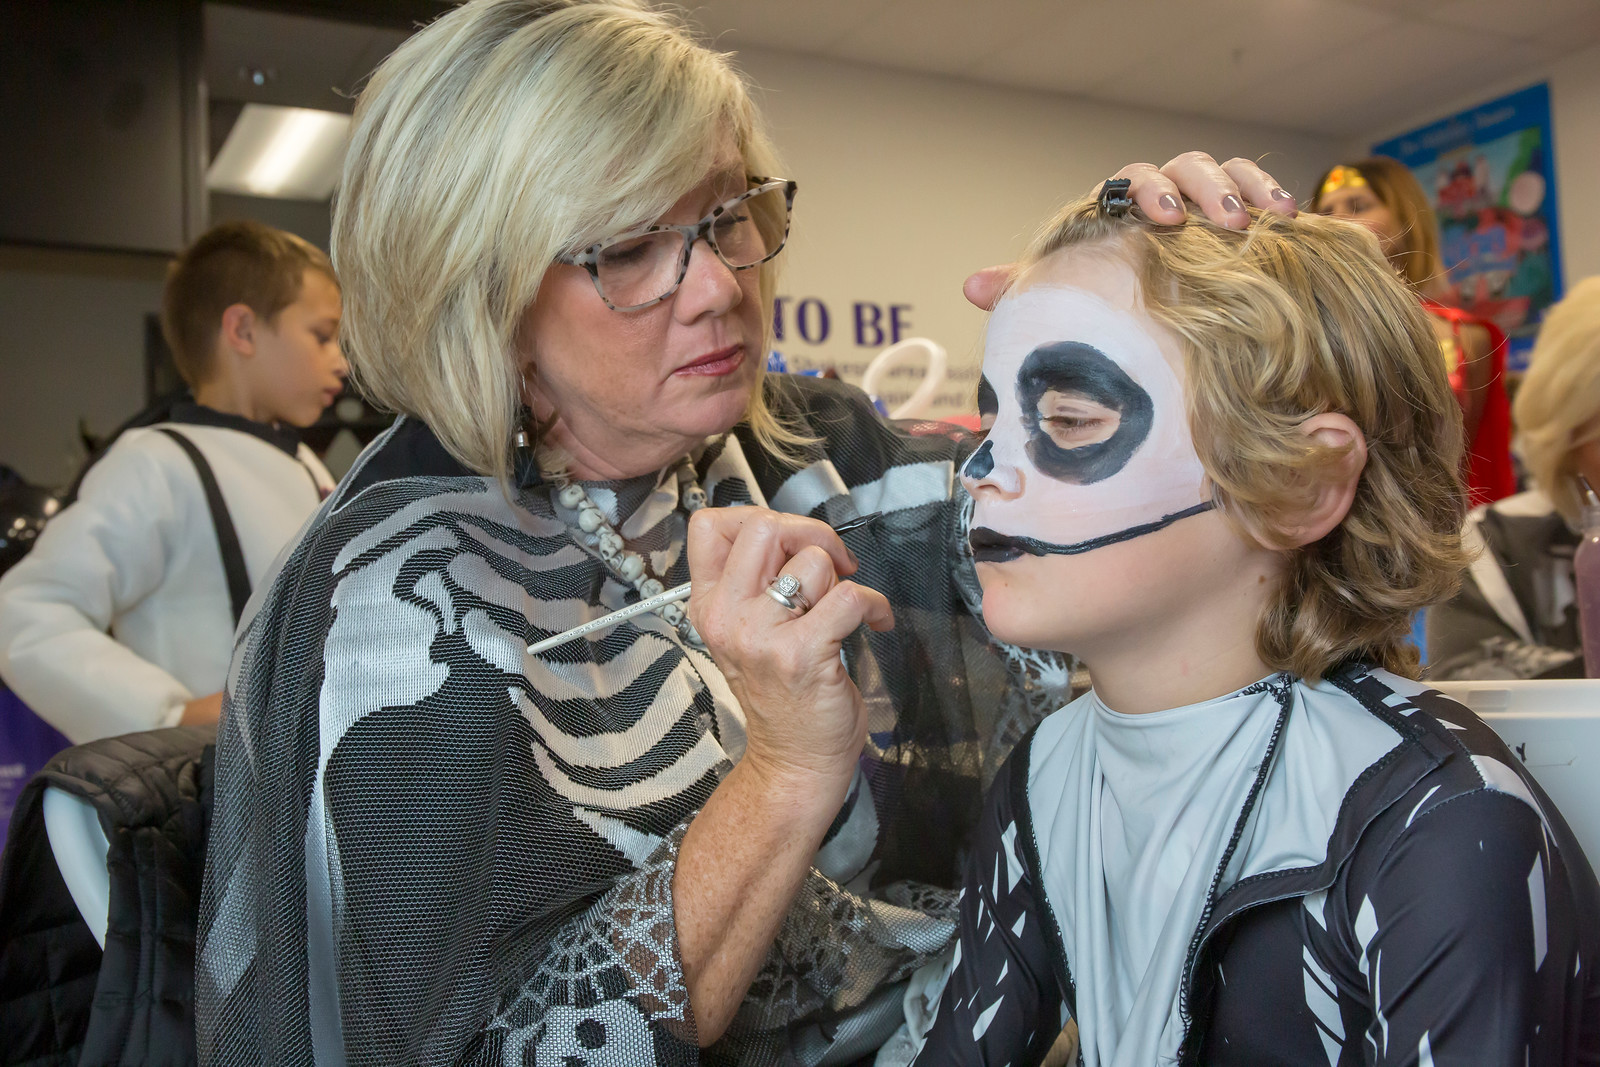 The Children's Theatre Of Cincinnati Announce Monster Bash, a Family-Friendly Halloween Party 